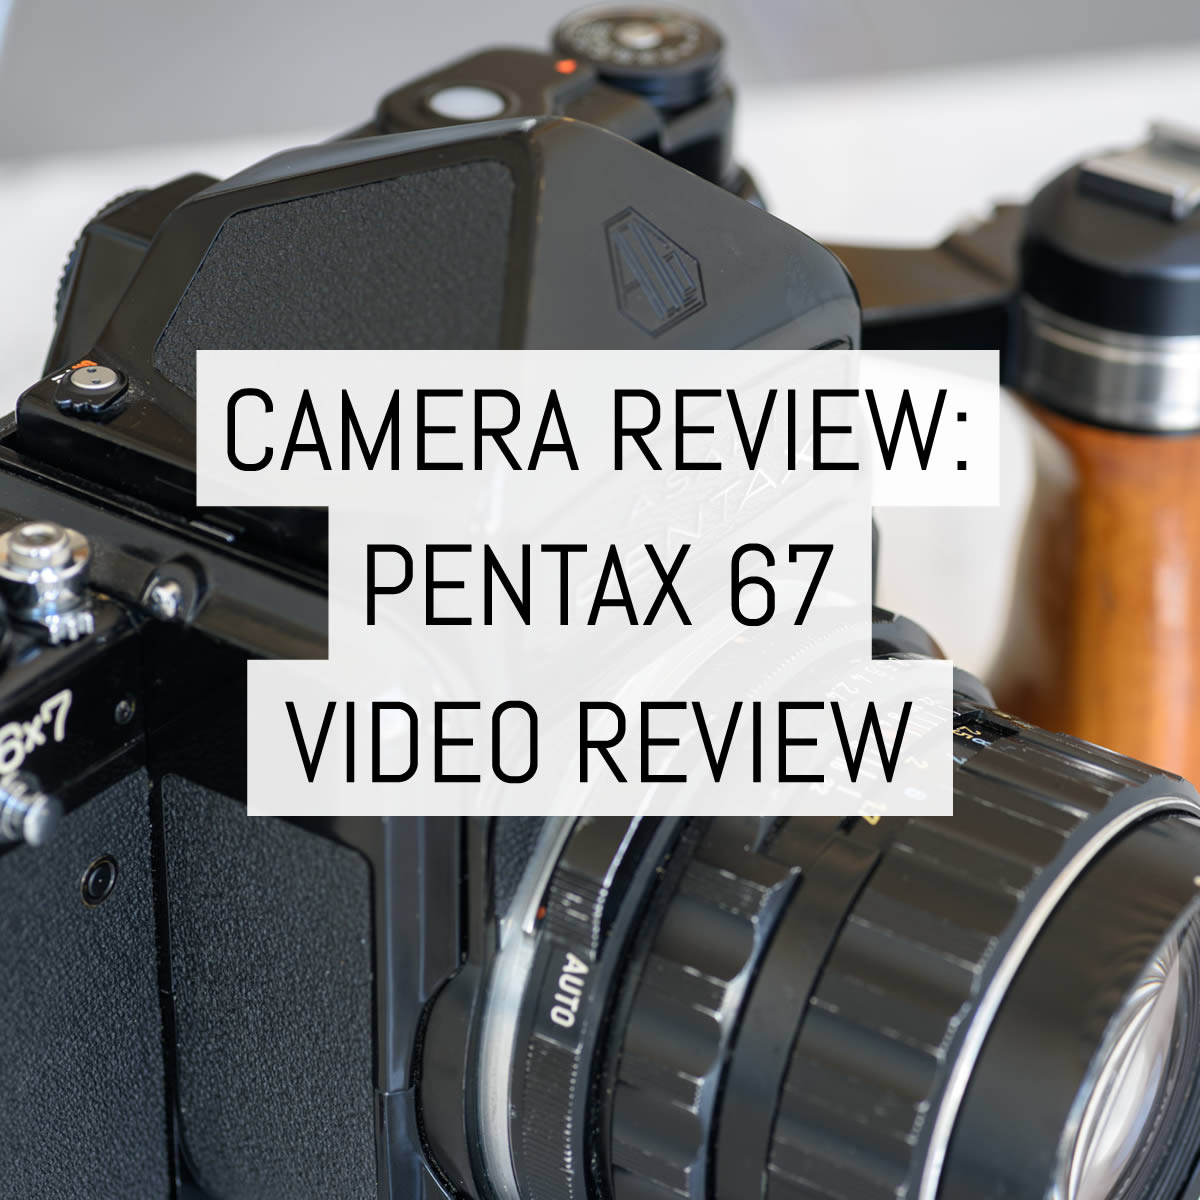 Cover - Camera Review - Pentax 67 Video Review